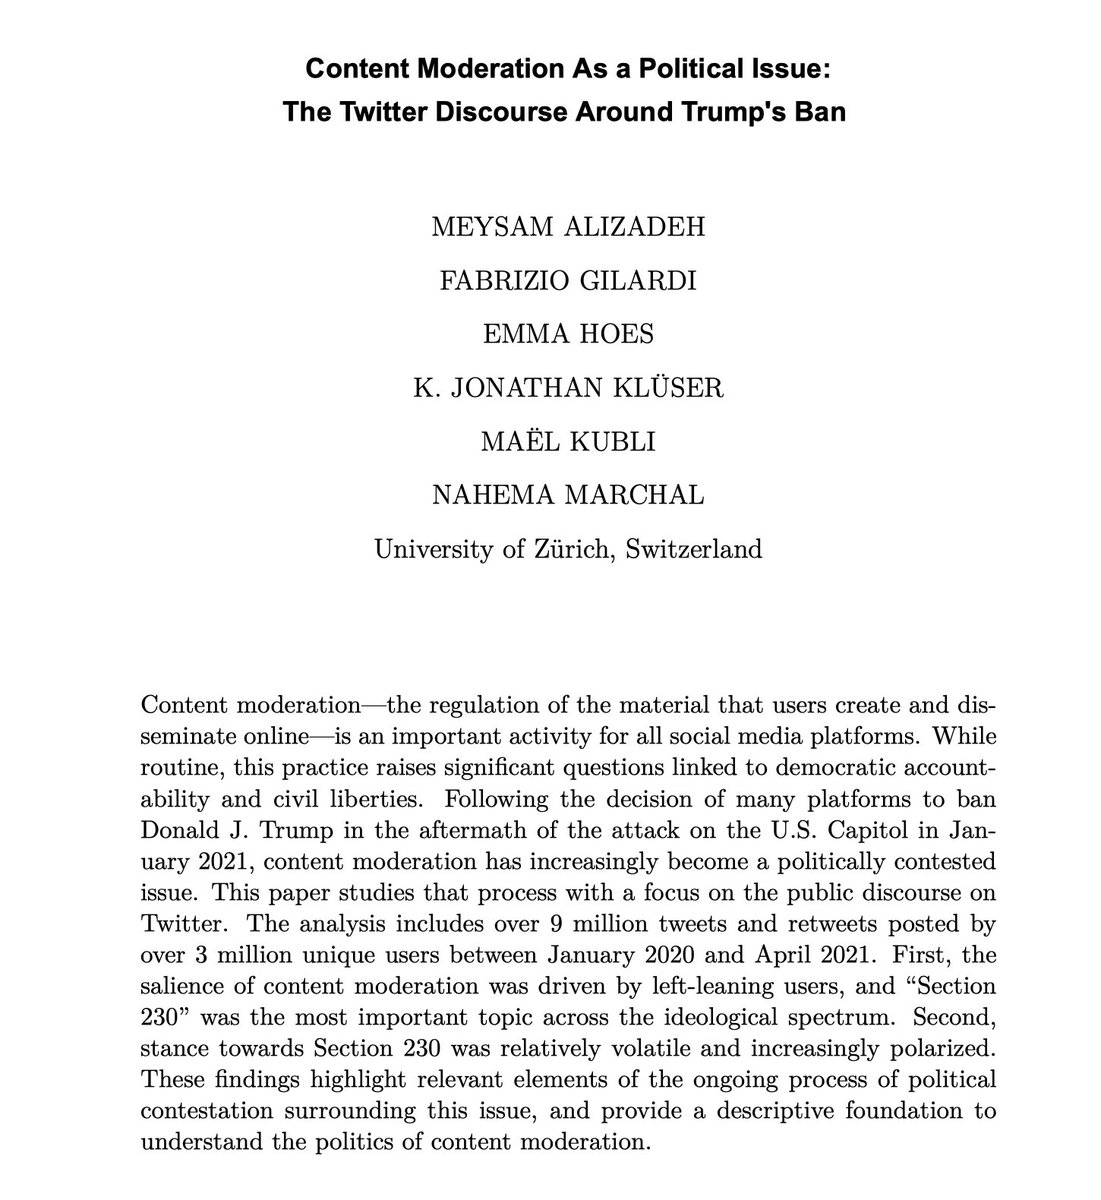 'Content Moderation As a Political Issue: The Twitter Discourse Around Trump's Ban' Very happy to see our first @PRODIGI_ERC paper out in the wonderful @journalqd! With @MeysamAIizadeh @EmmaHoes93 @klueserthan @MaelKubli @nahema_marchal #OpenAccess journalqd.org/article/view/3…